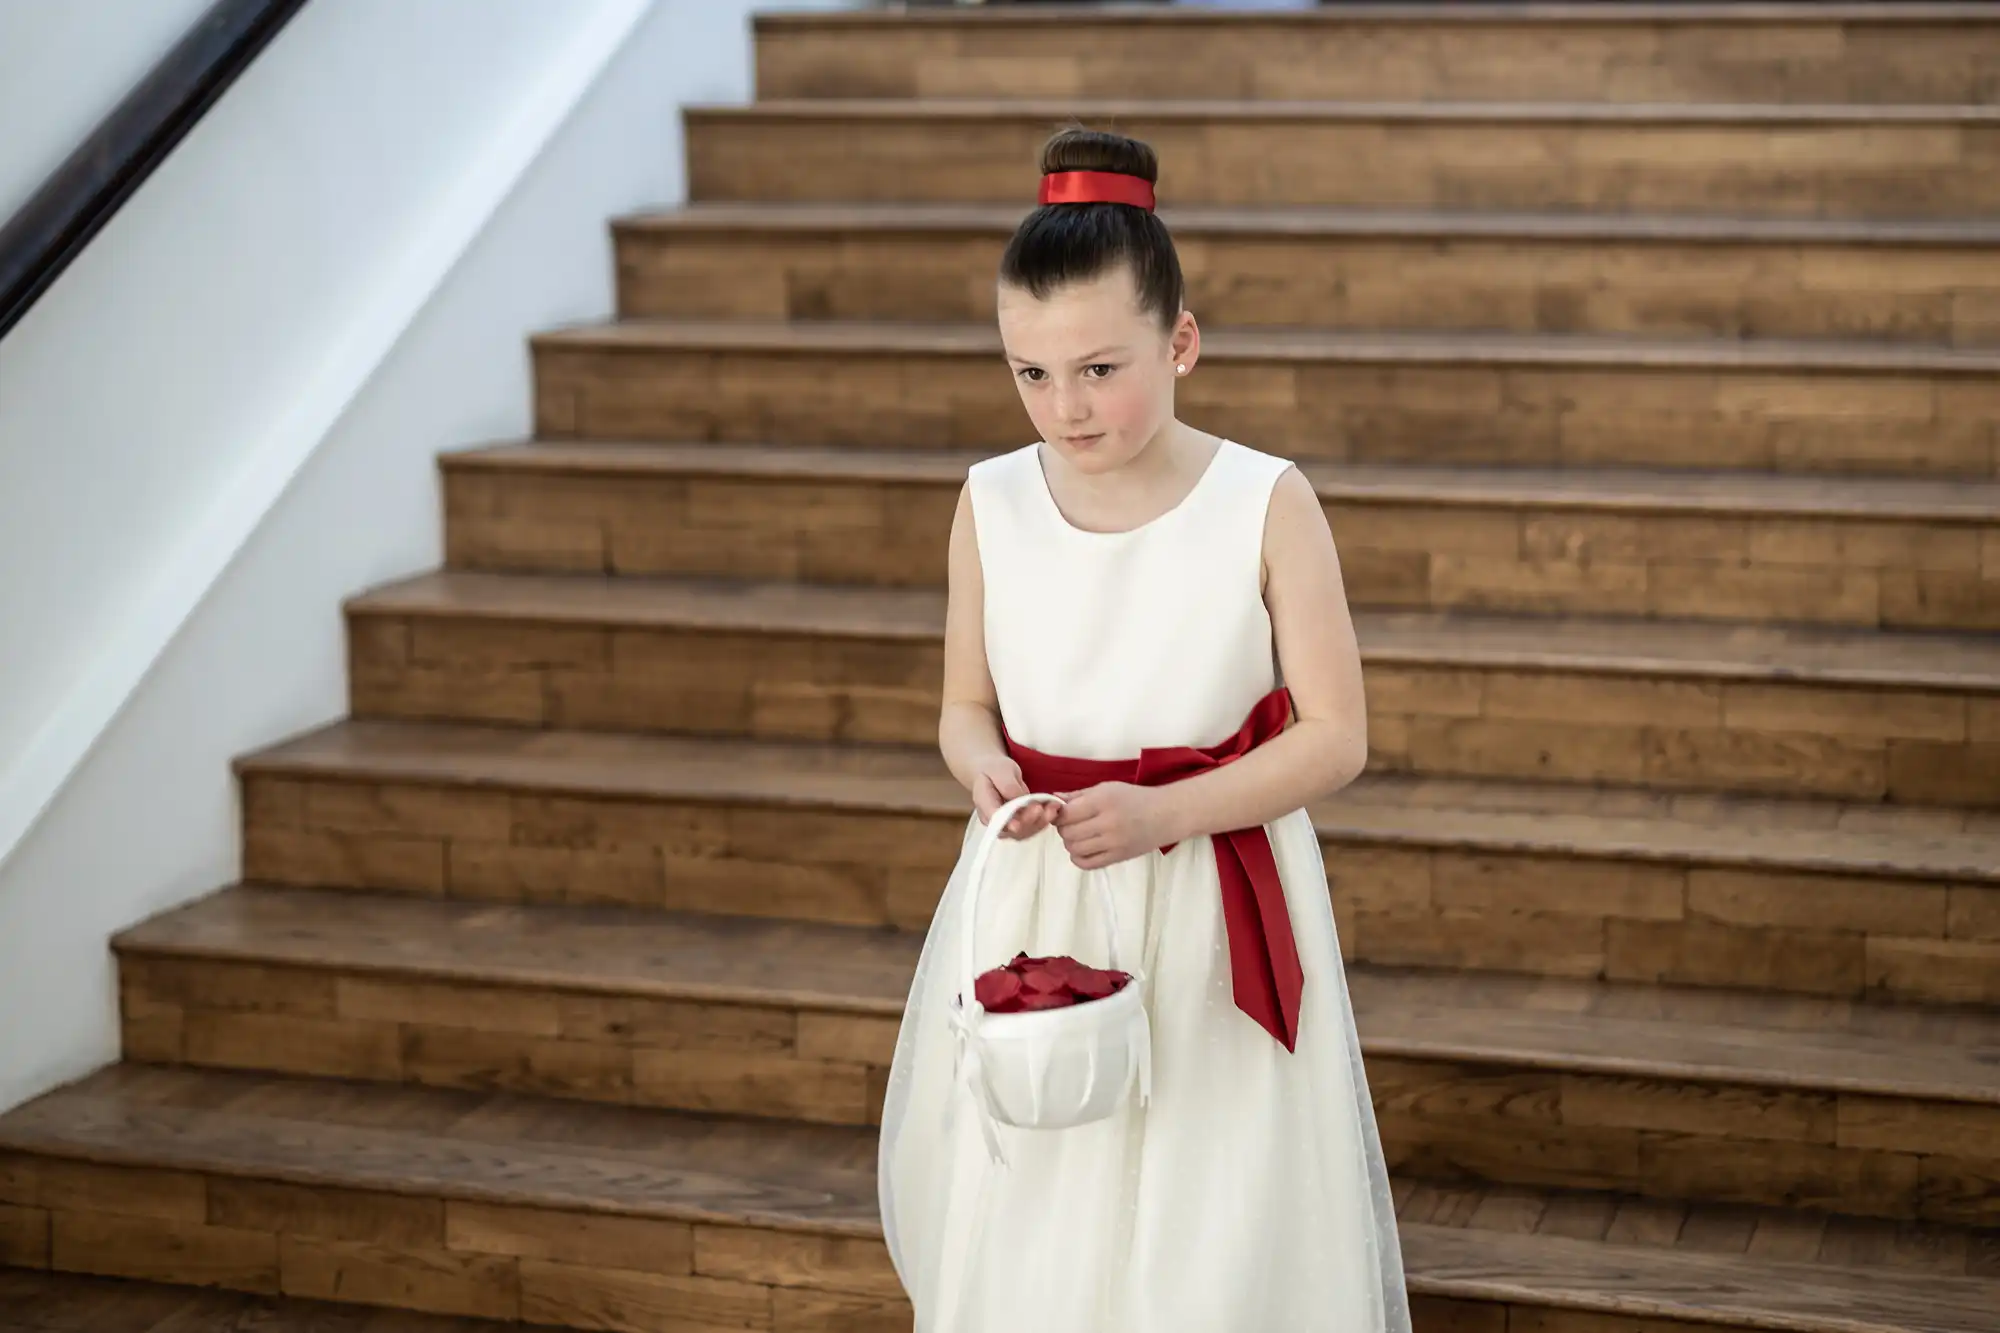 A young girl in a white dress with a red sash stands holding a white basket with red petals, posed in front of a wooden staircase.